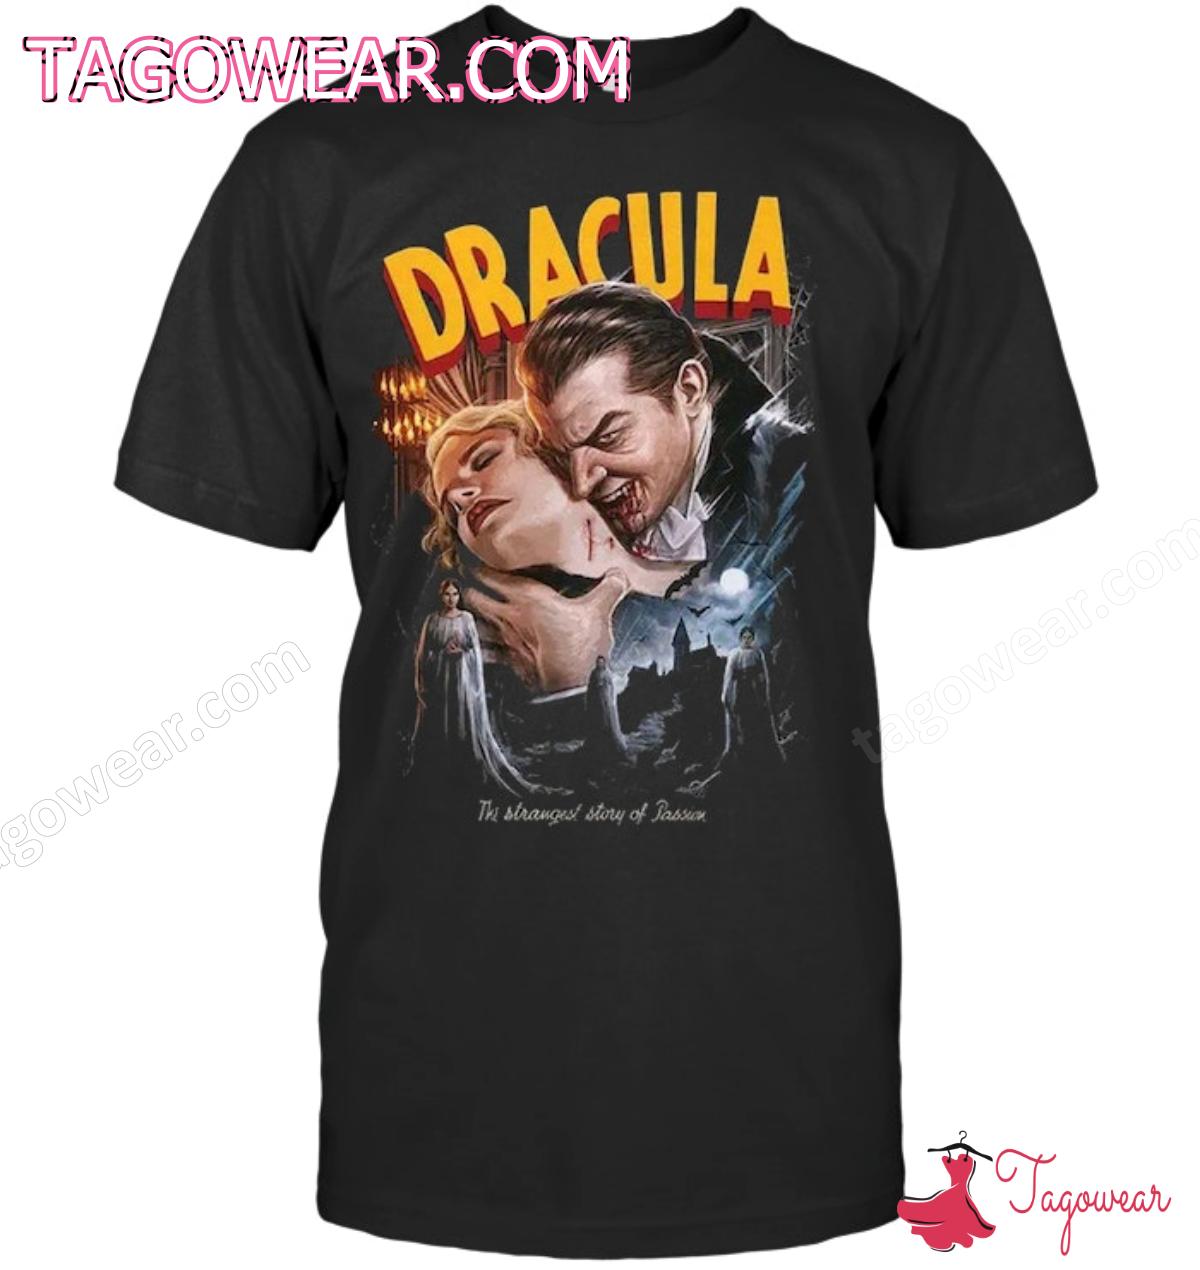 Dracula The Strangest Story Of Passion Shirt